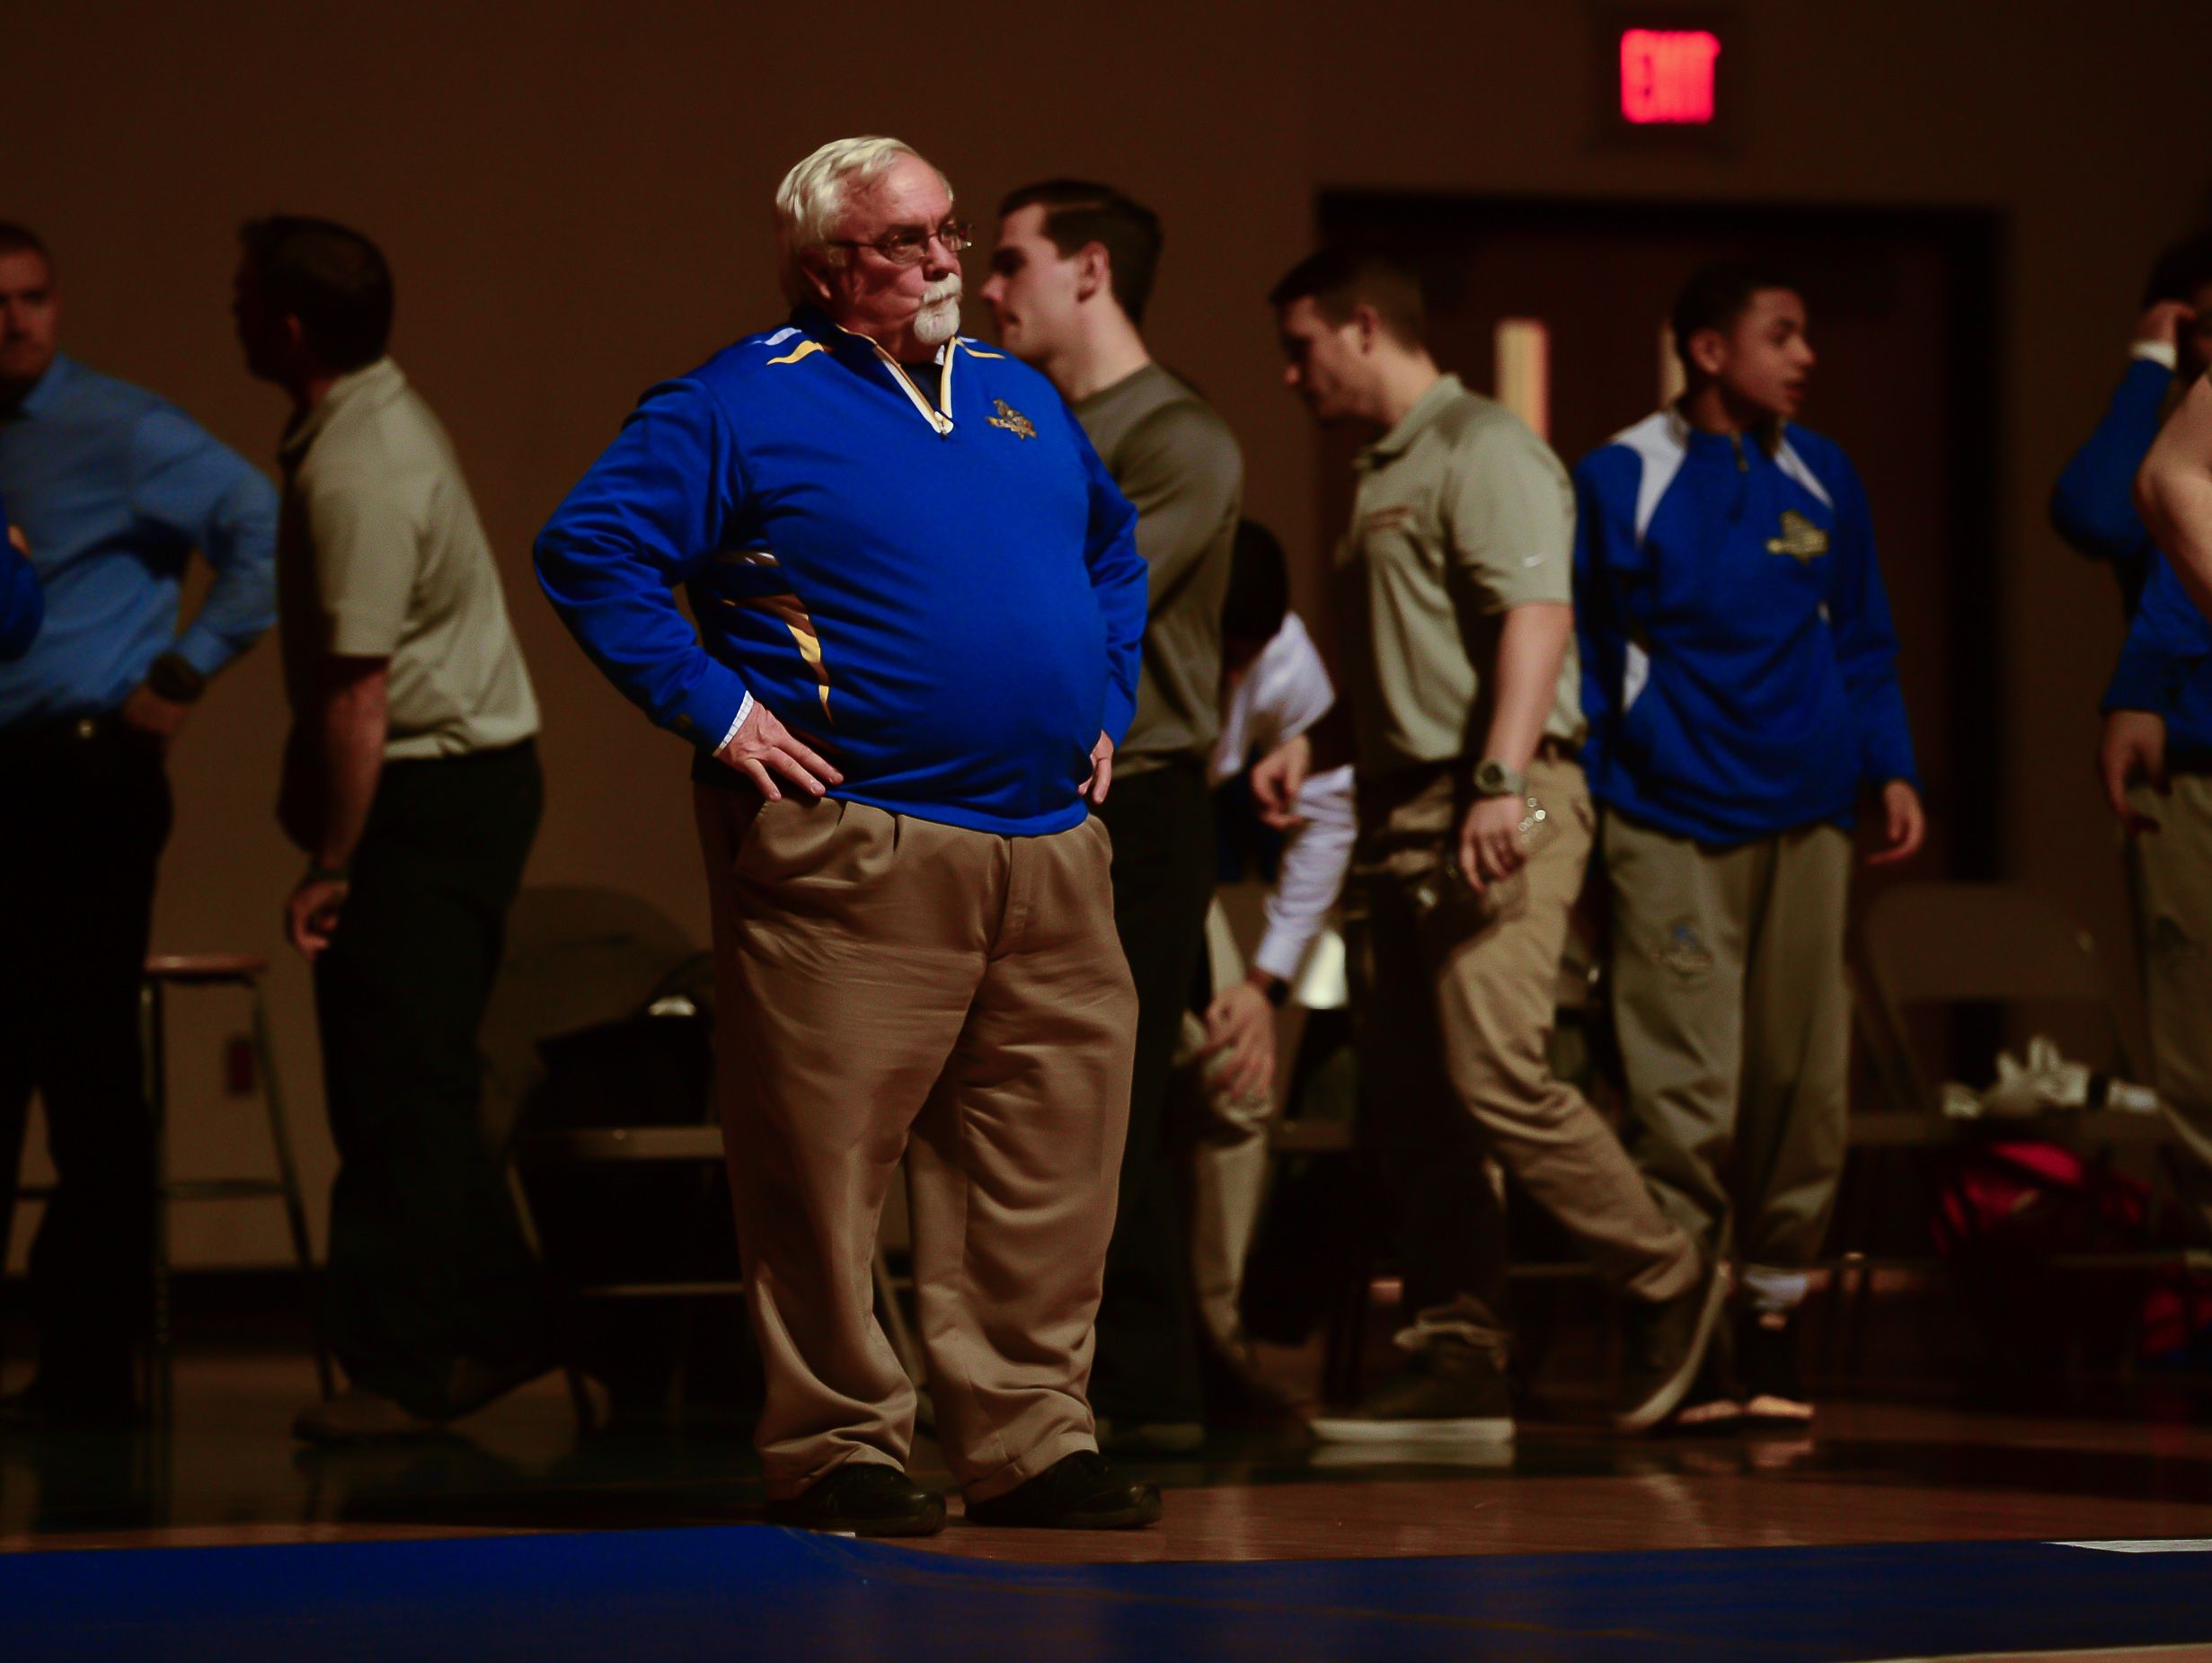 Sussex Central's head Coach Phil Shultie (left) during the match up against Poltech on Wednesday, Feb. 2, 2017.